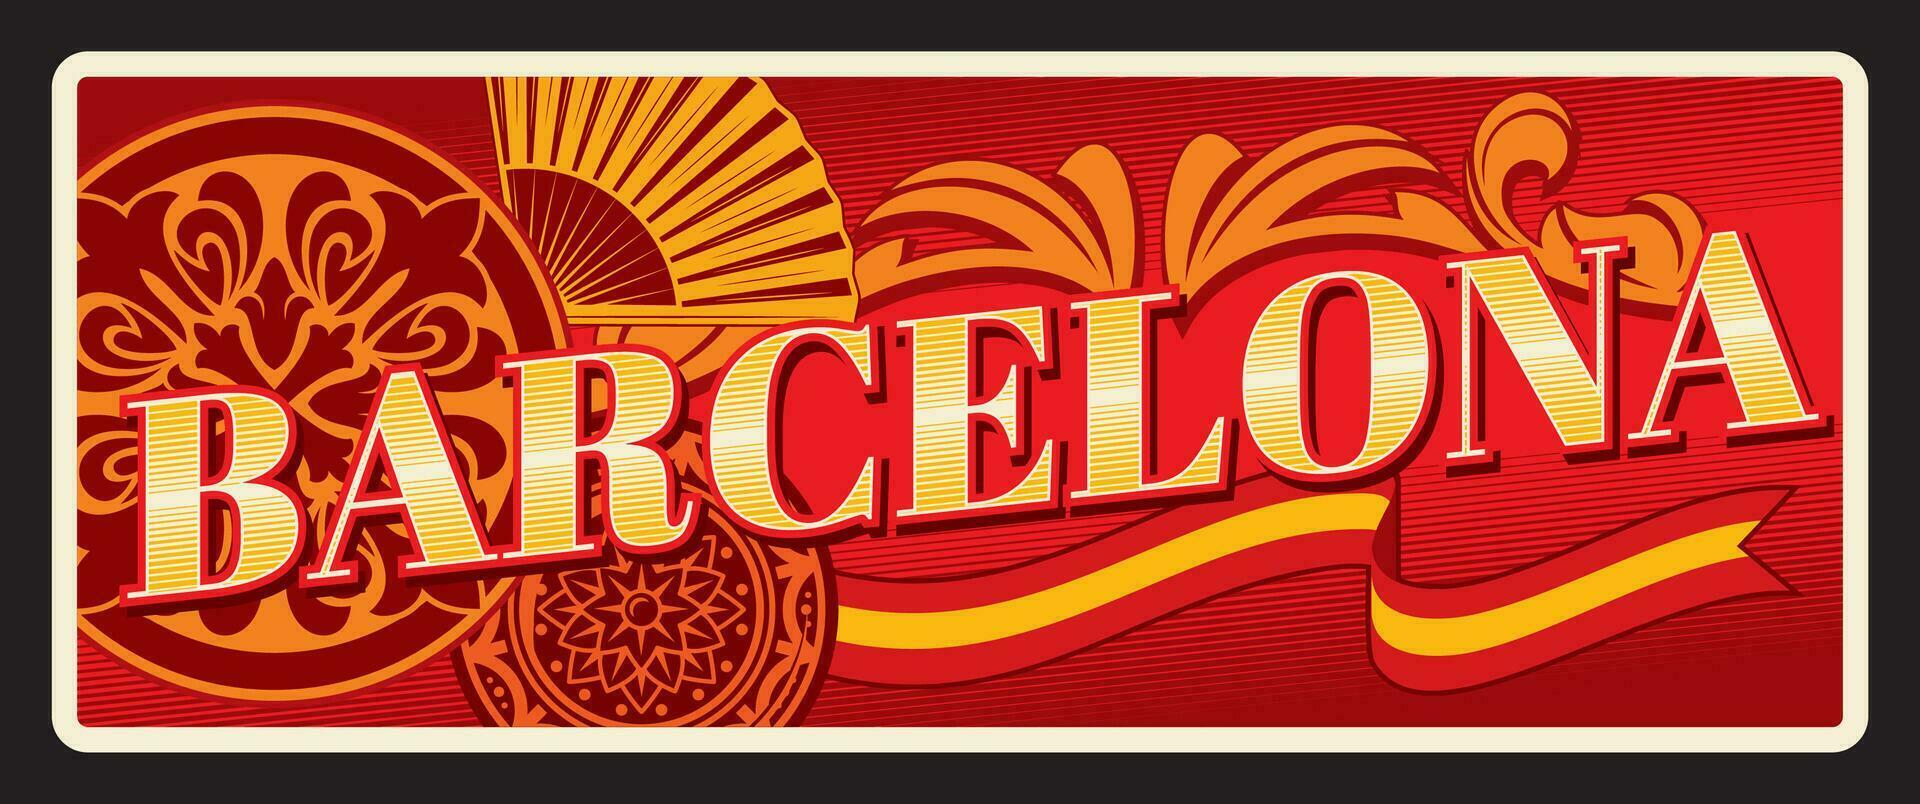 Barcelona travel sticker and plate, Spain sign vector